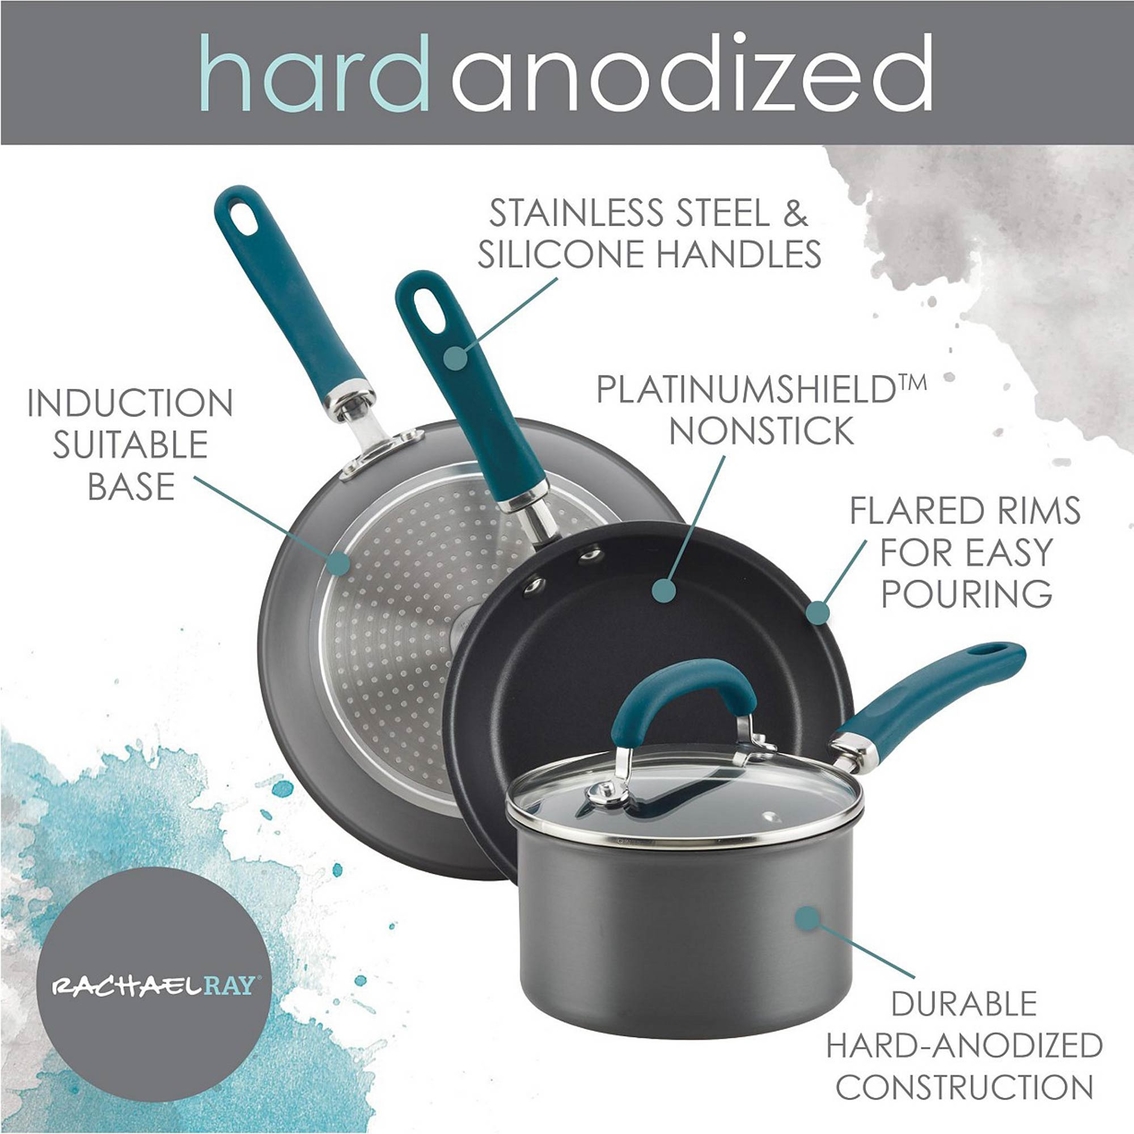 Rachael Ray Create Delicious Hard Anodized Aluminum Nonstick 11 pc. Cookware Set - Image 6 of 7